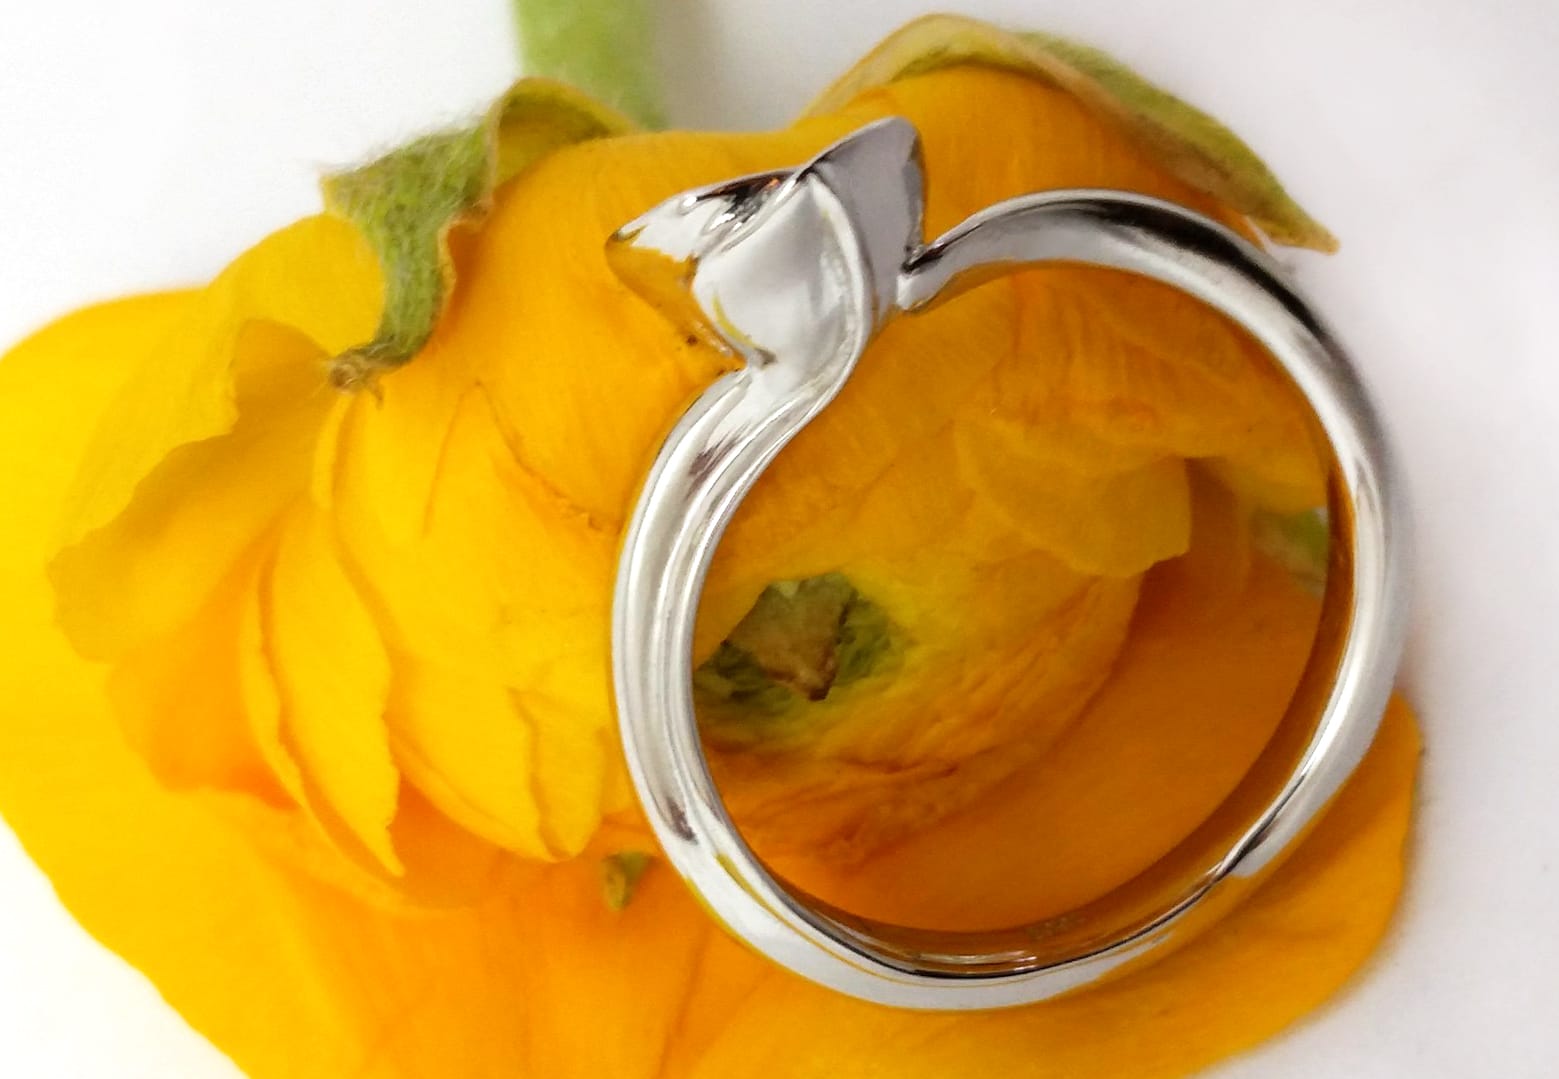 18ct Fairtrade white gold in bespoke lily design by Zoe Pook Jewellery